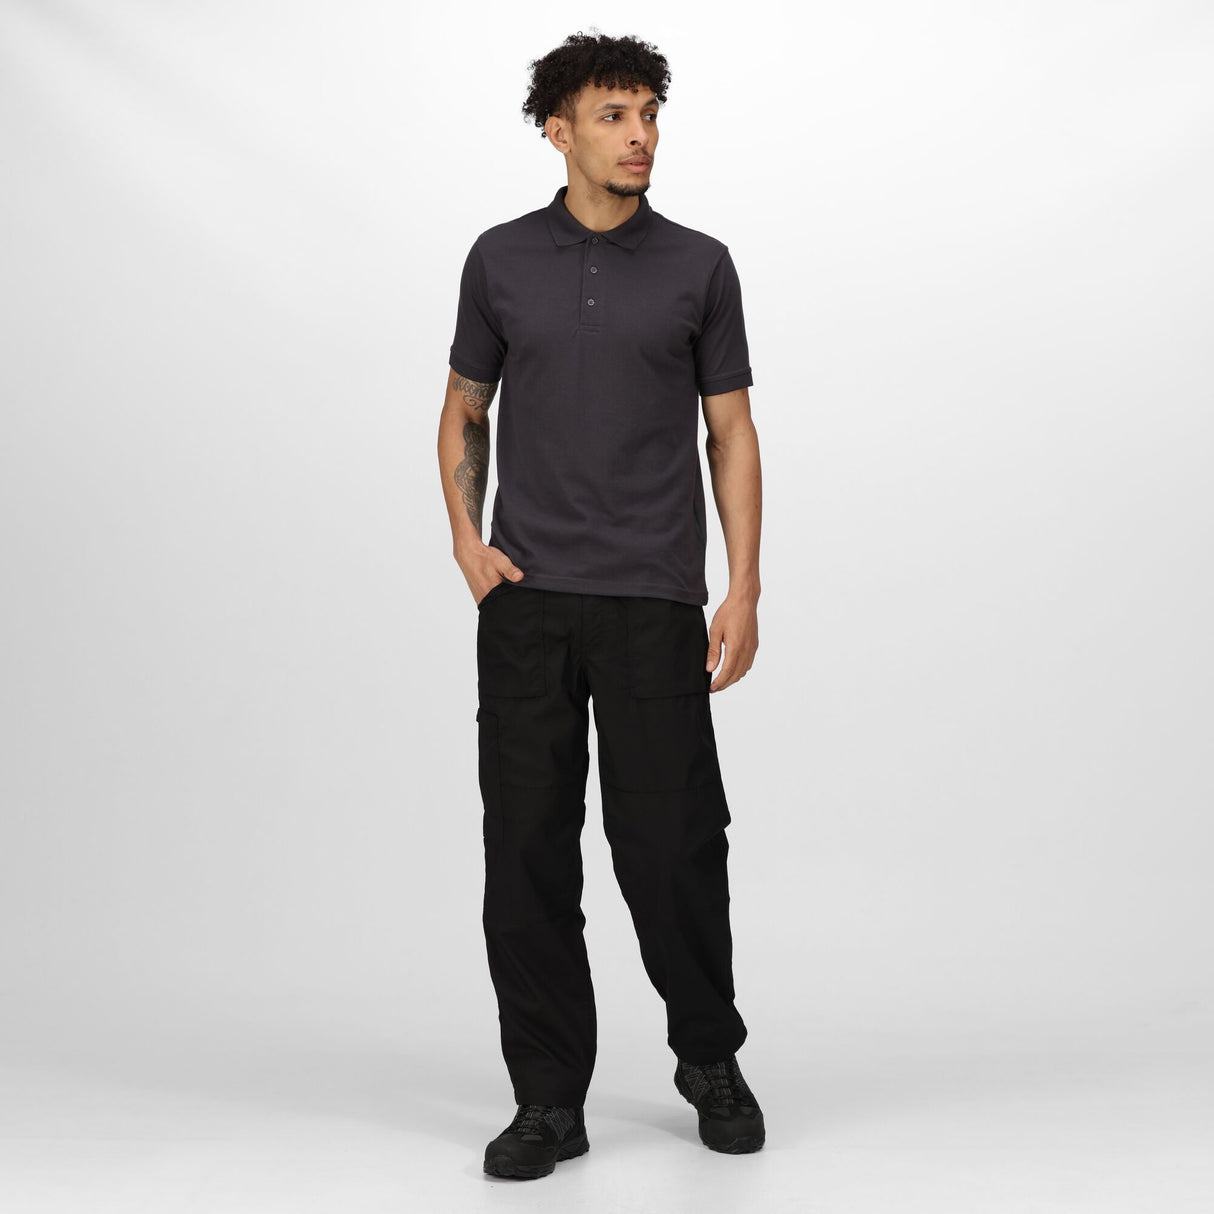 Regatta Professional Lined Action Trousers